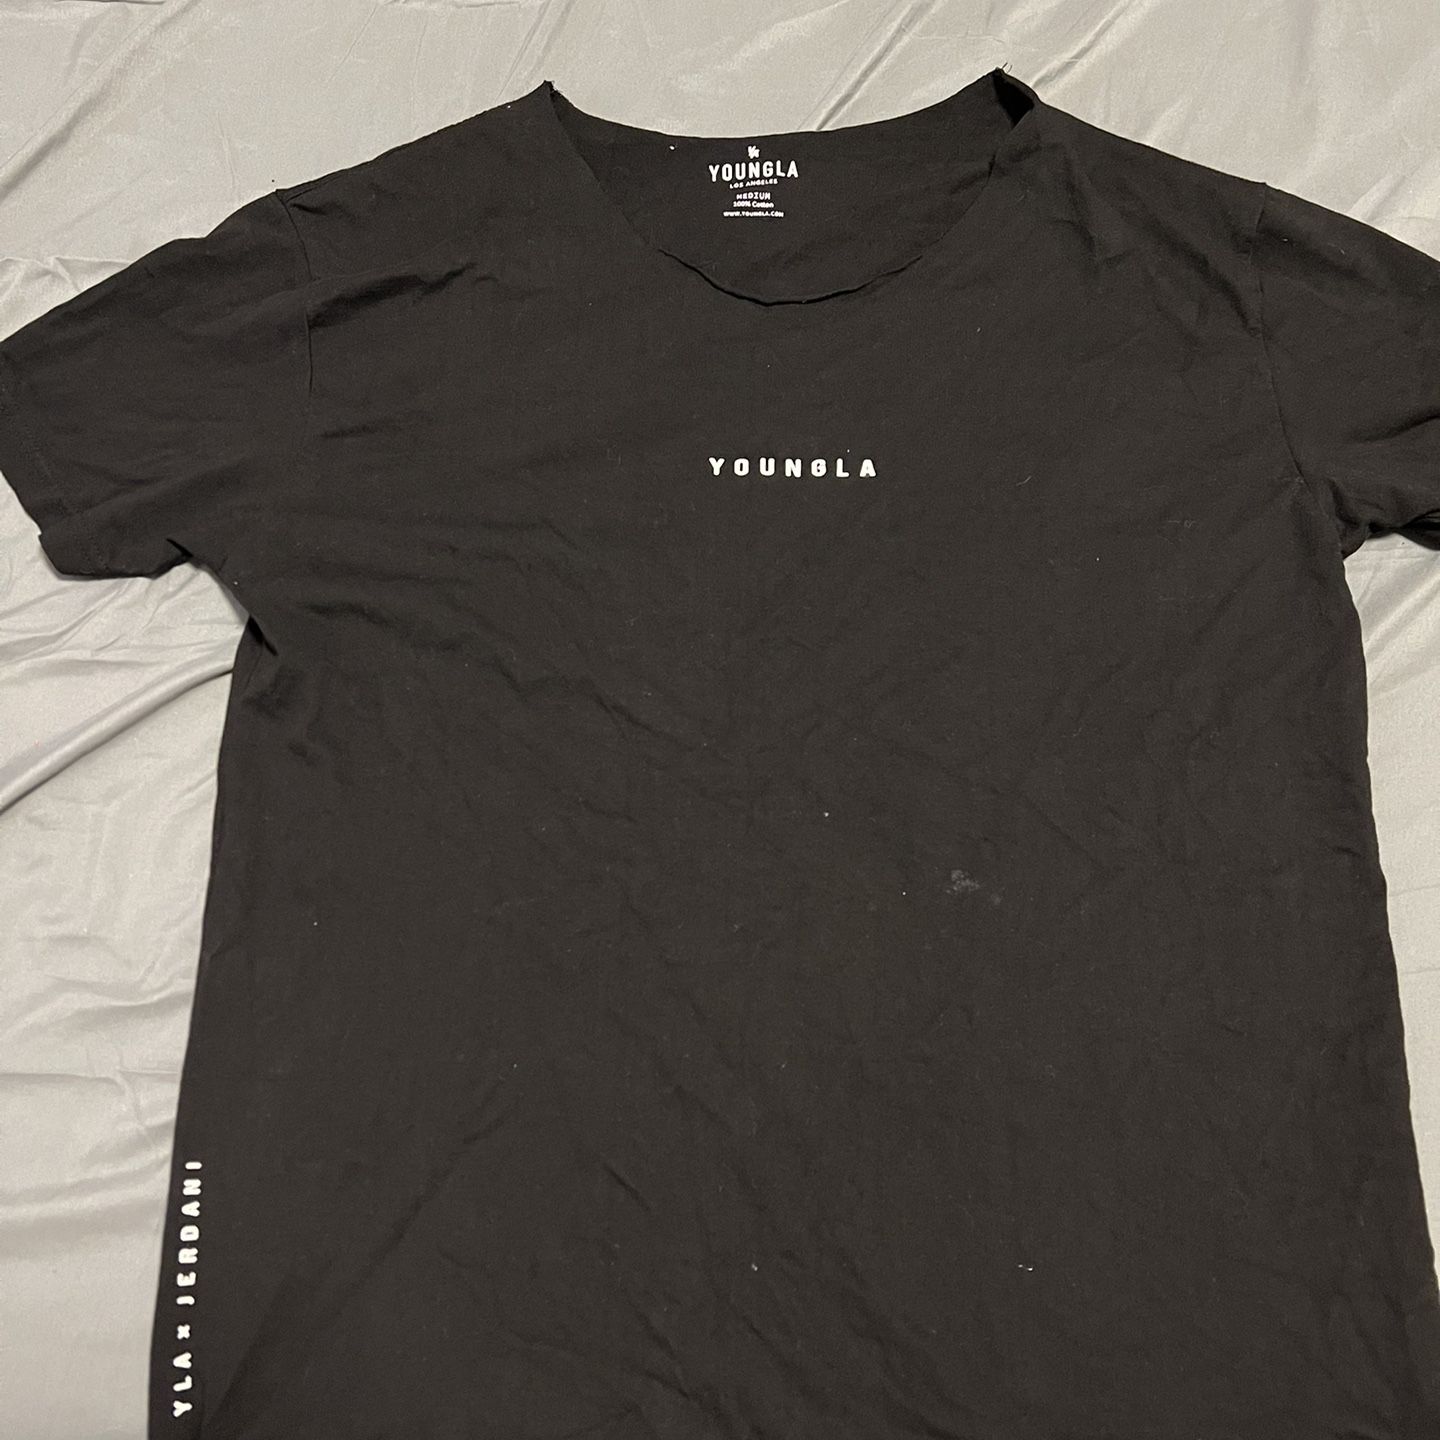 Young LA Jerdani Tee for Sale in Chino Hills, CA - OfferUp